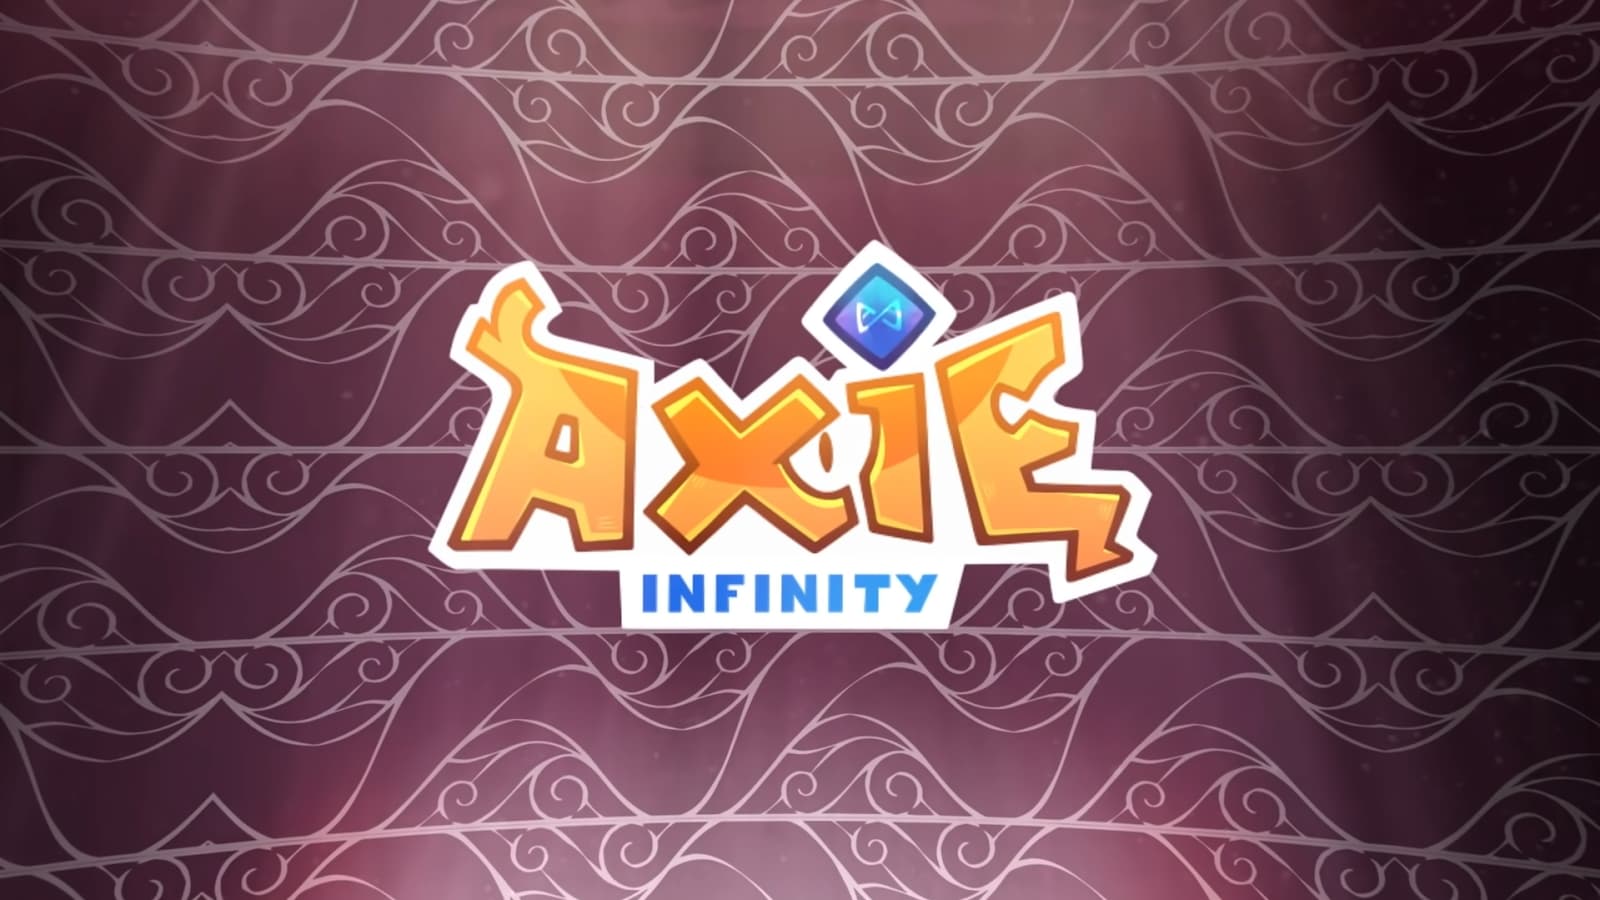 The logo of 'Axie Infinity', featuring stylized text and a shiny gem